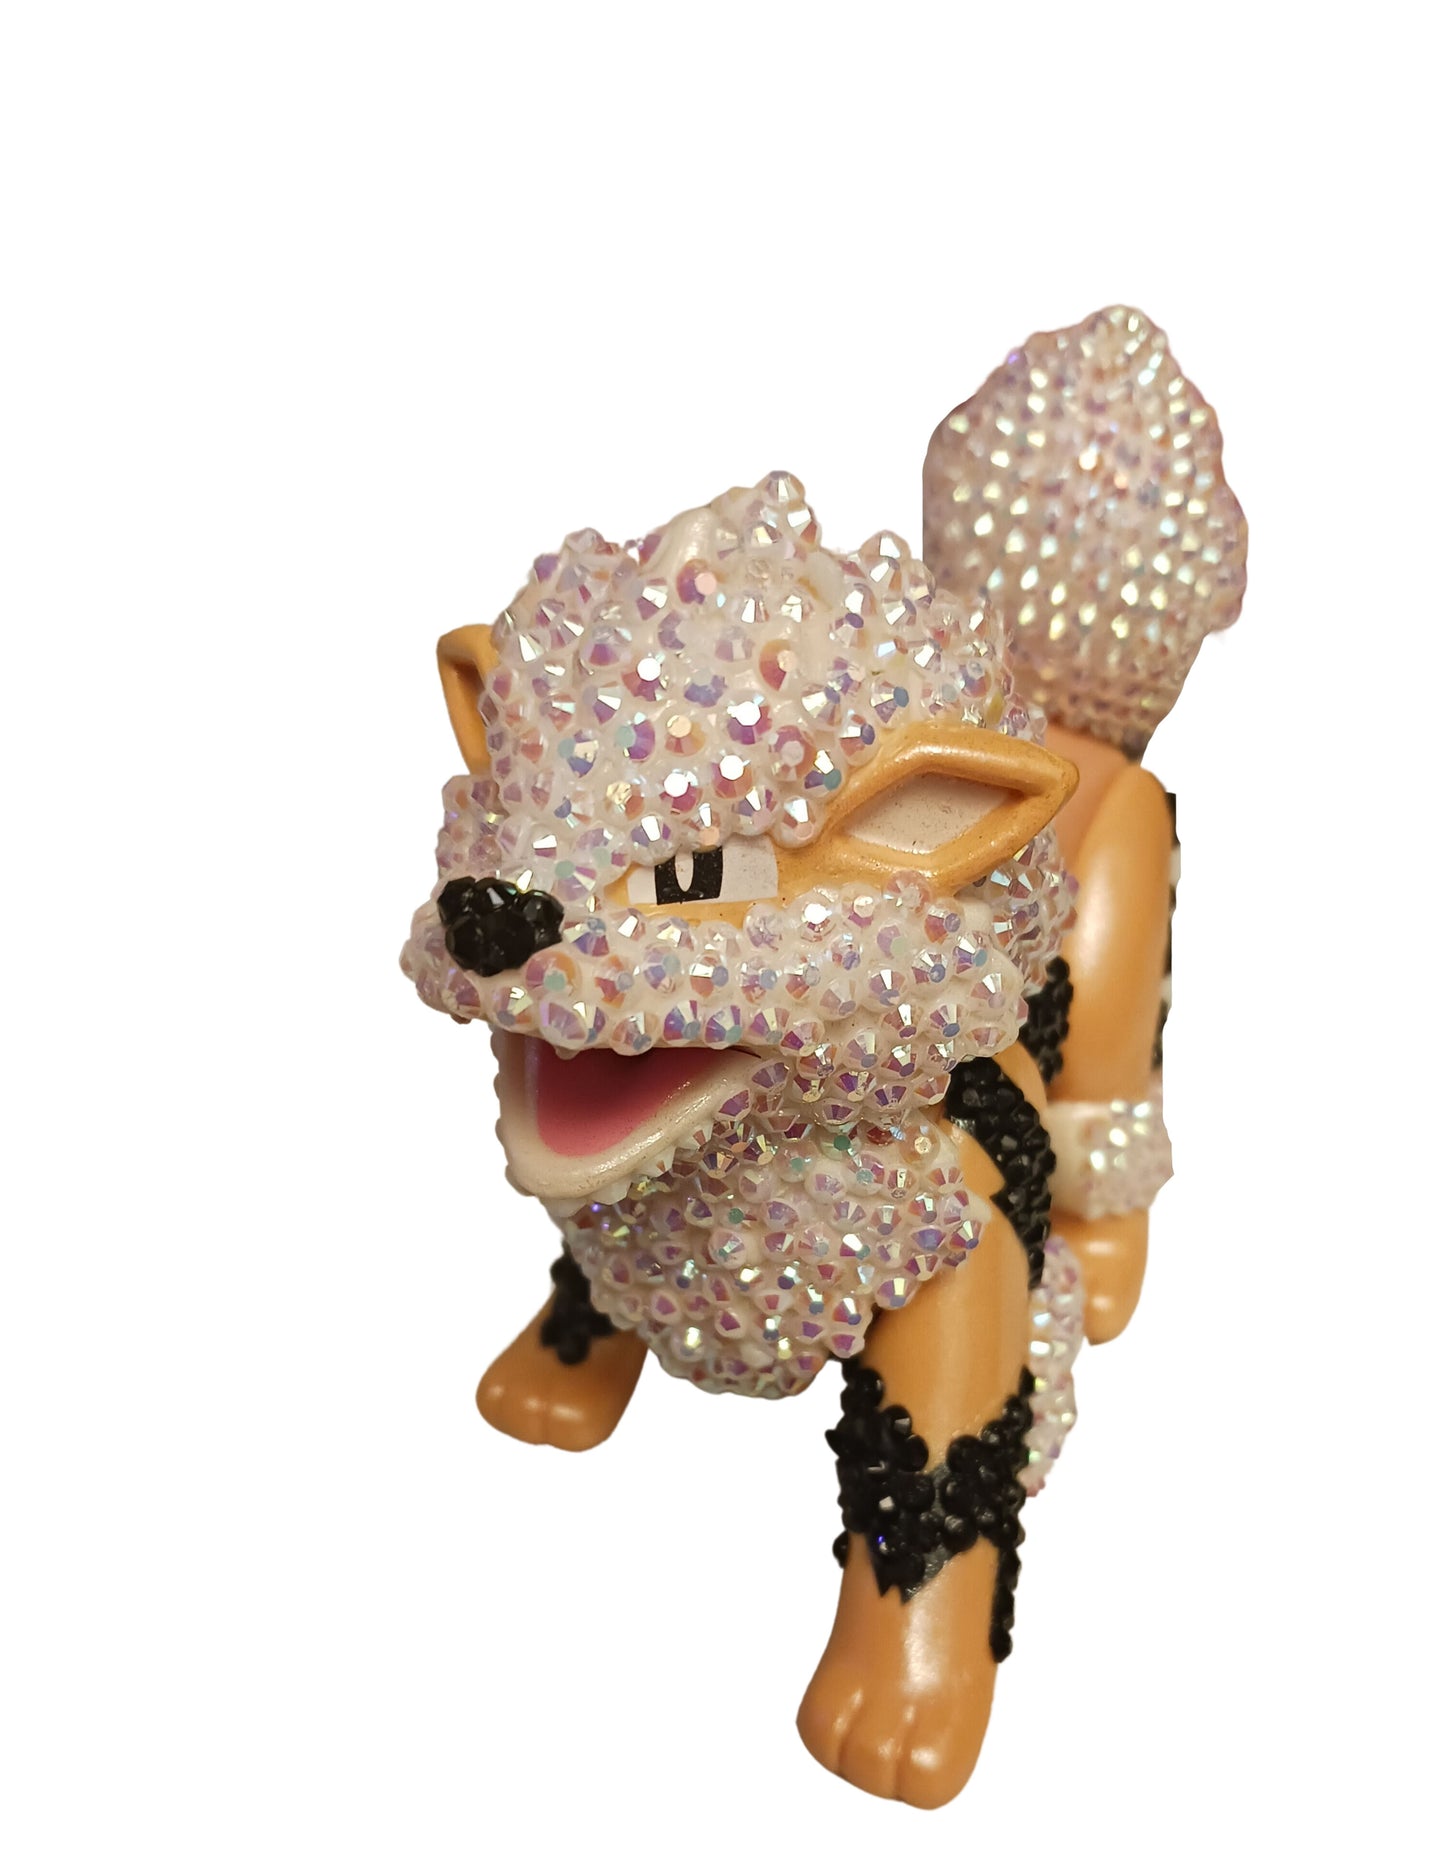 Blinged out Figurines